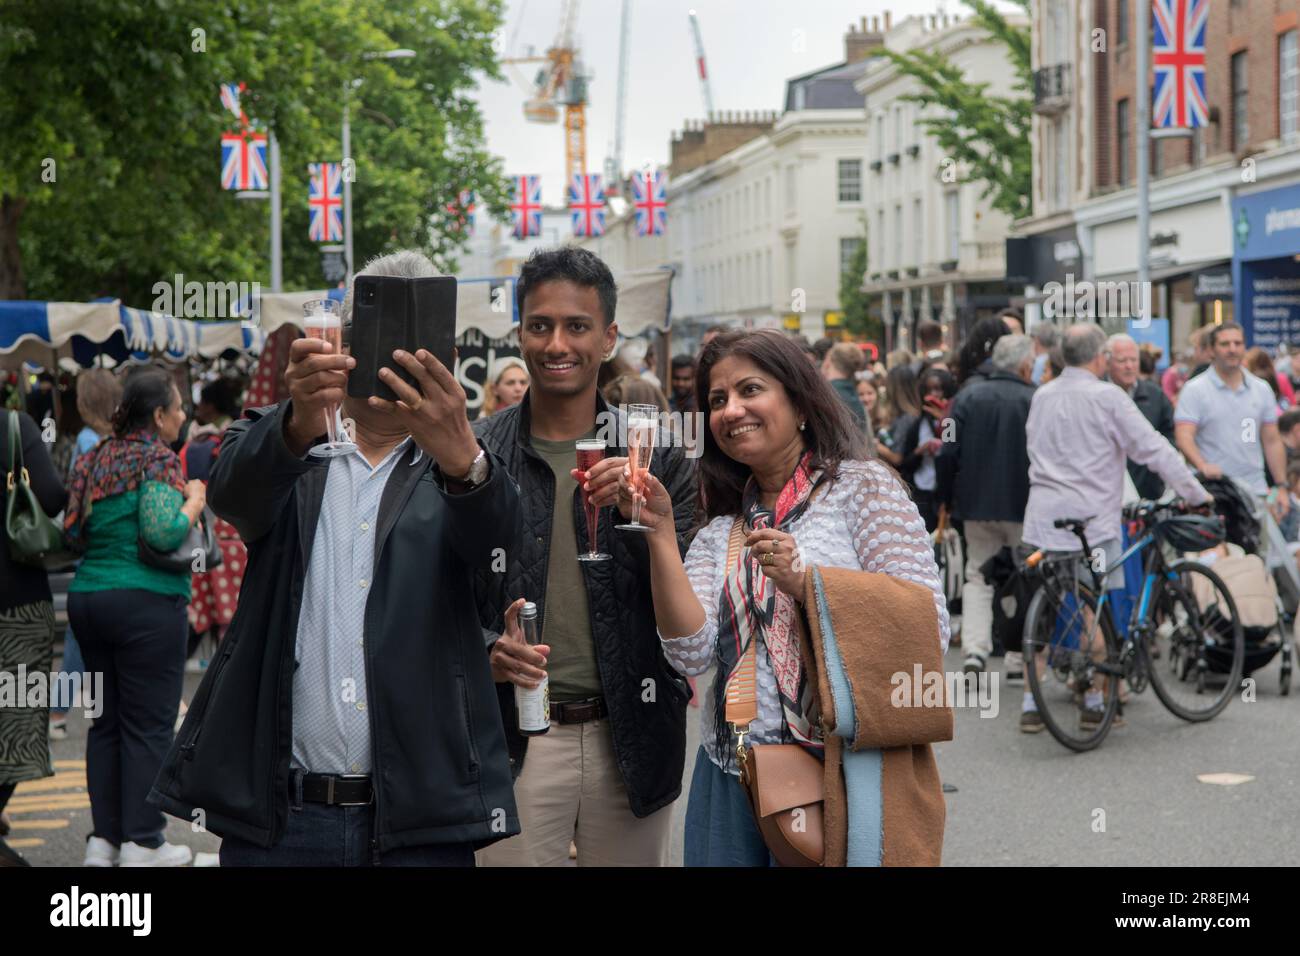 Chelsea, London, England 4th June 2022. The Kings Road, Platinum Jubilee Street Party, that is supporting the British Red Cross Ukraine crisis appeal. The Kings Road is in part closed to traffic, crowds of local and tourists enjoy the summer weather. A family from Asia take a selfie holding plastic Champagne picnic glasses. Stock Photo